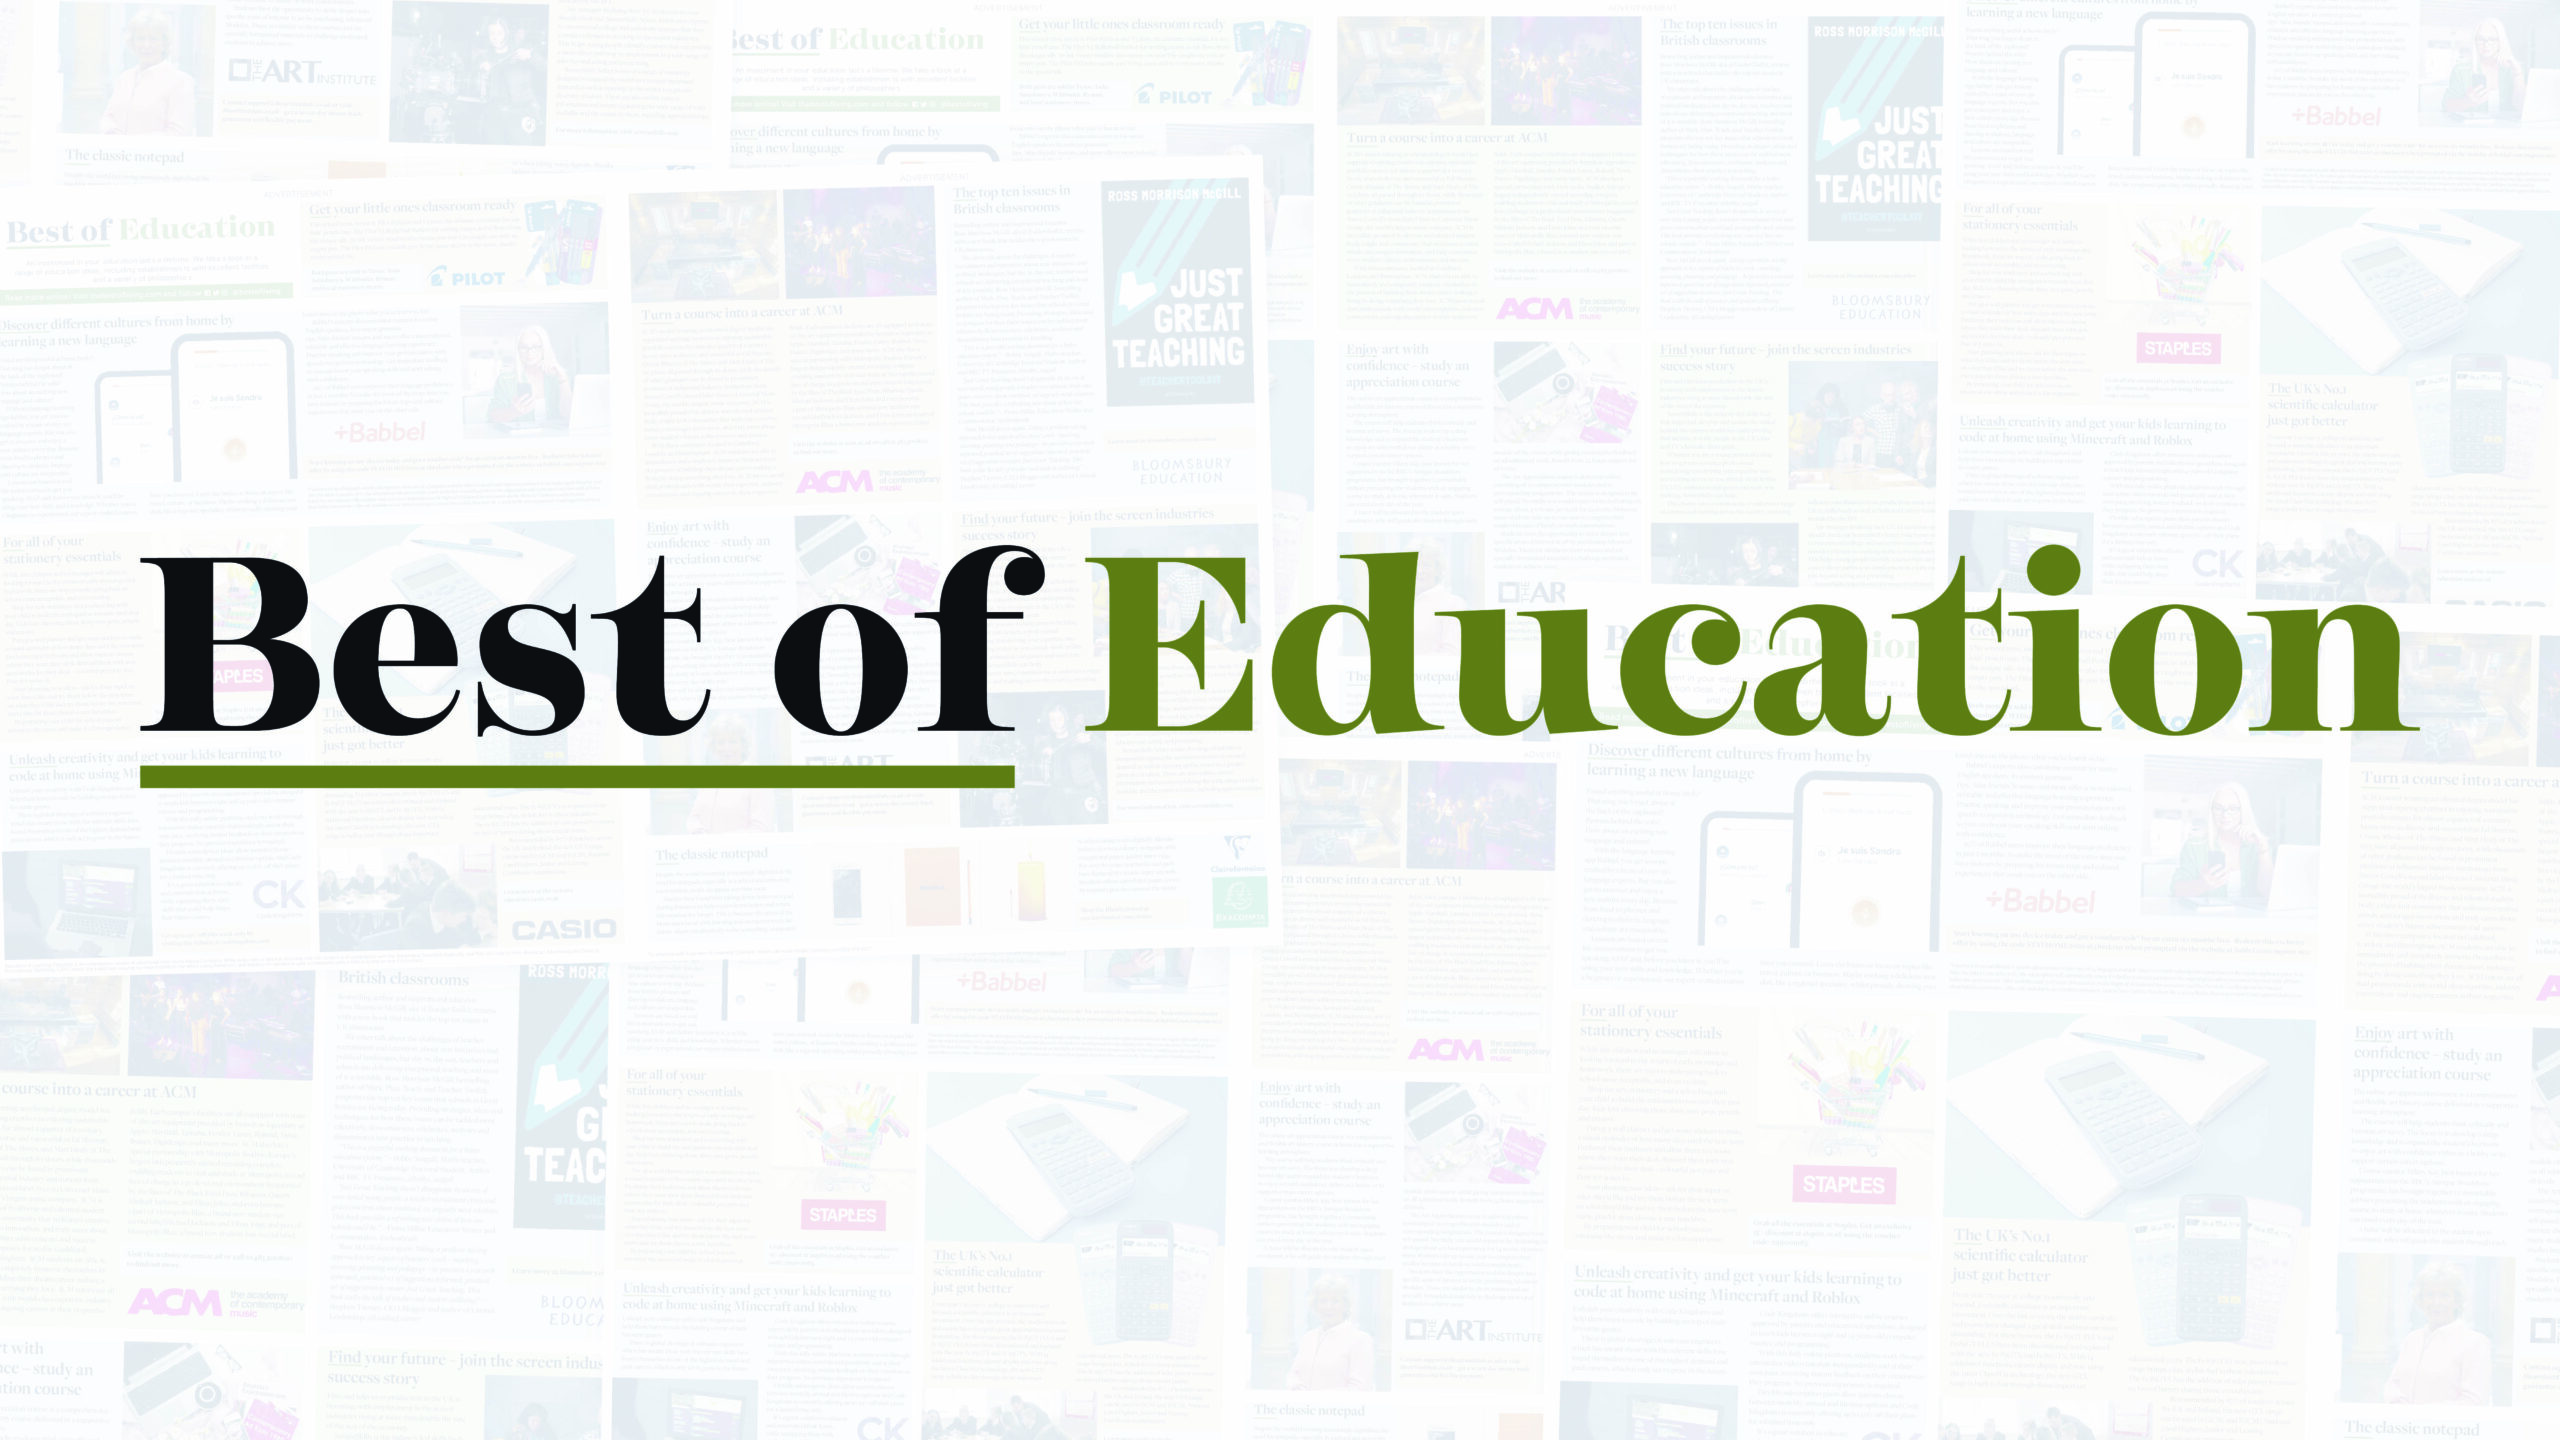 Best of Education